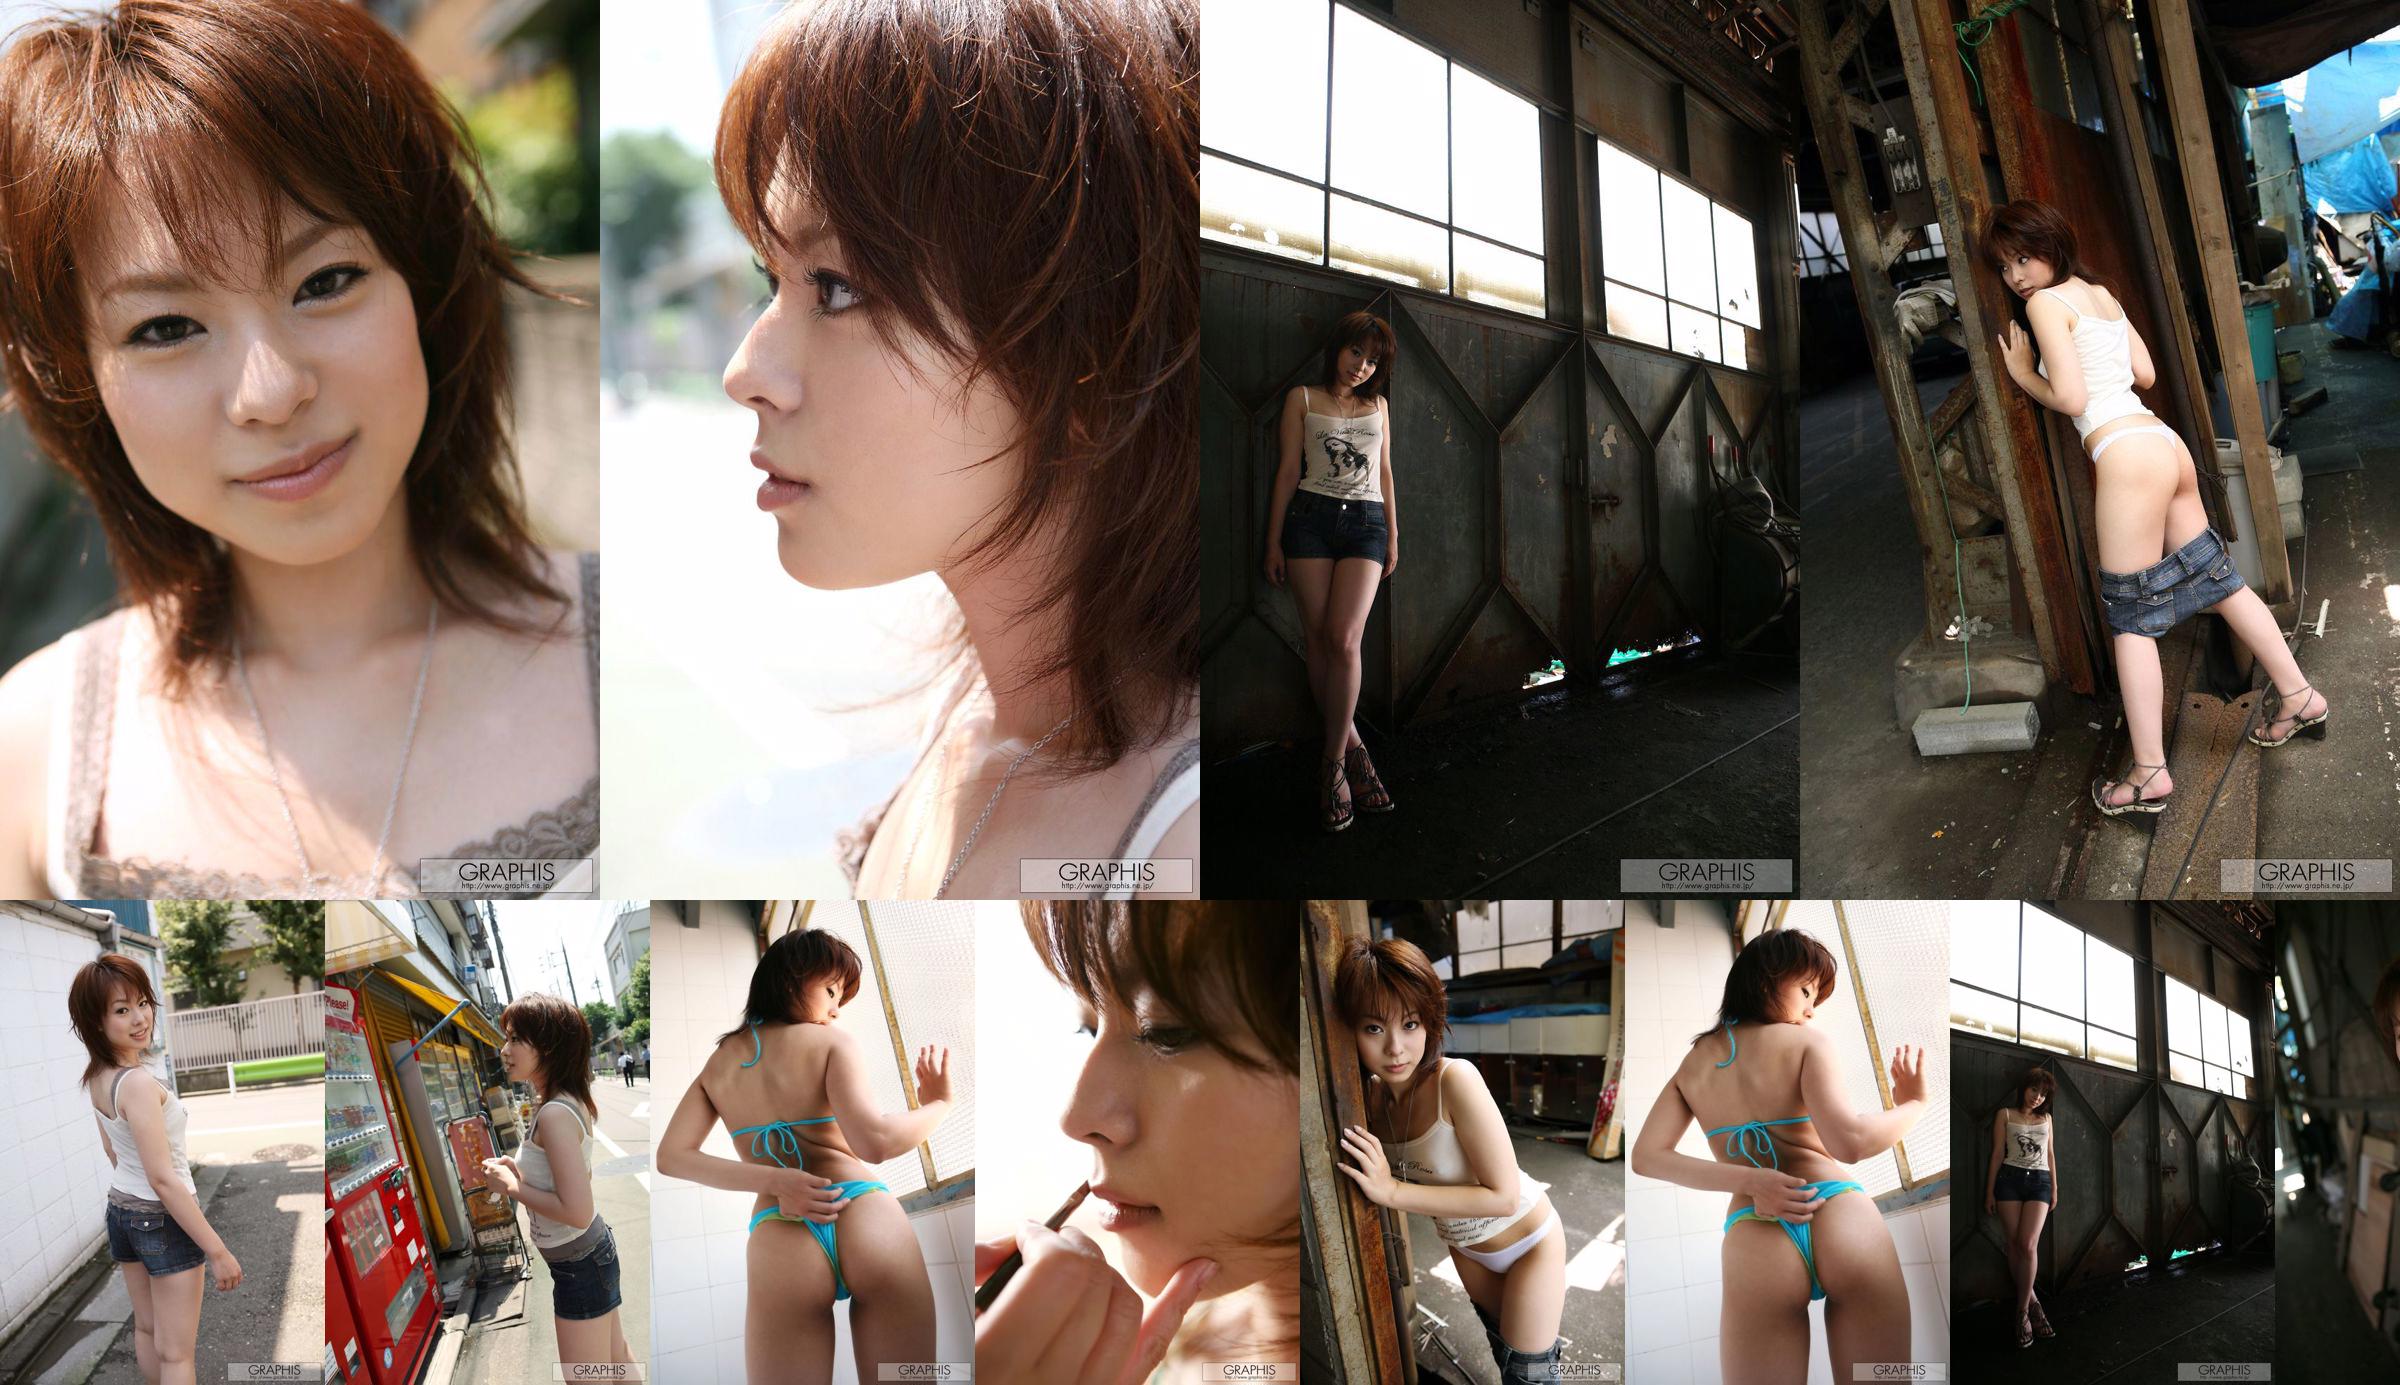 Mina Manabe 真锅美奈 [Graphis] First Gravure 初脱ぎ娘 No.4bcc5d 第10页